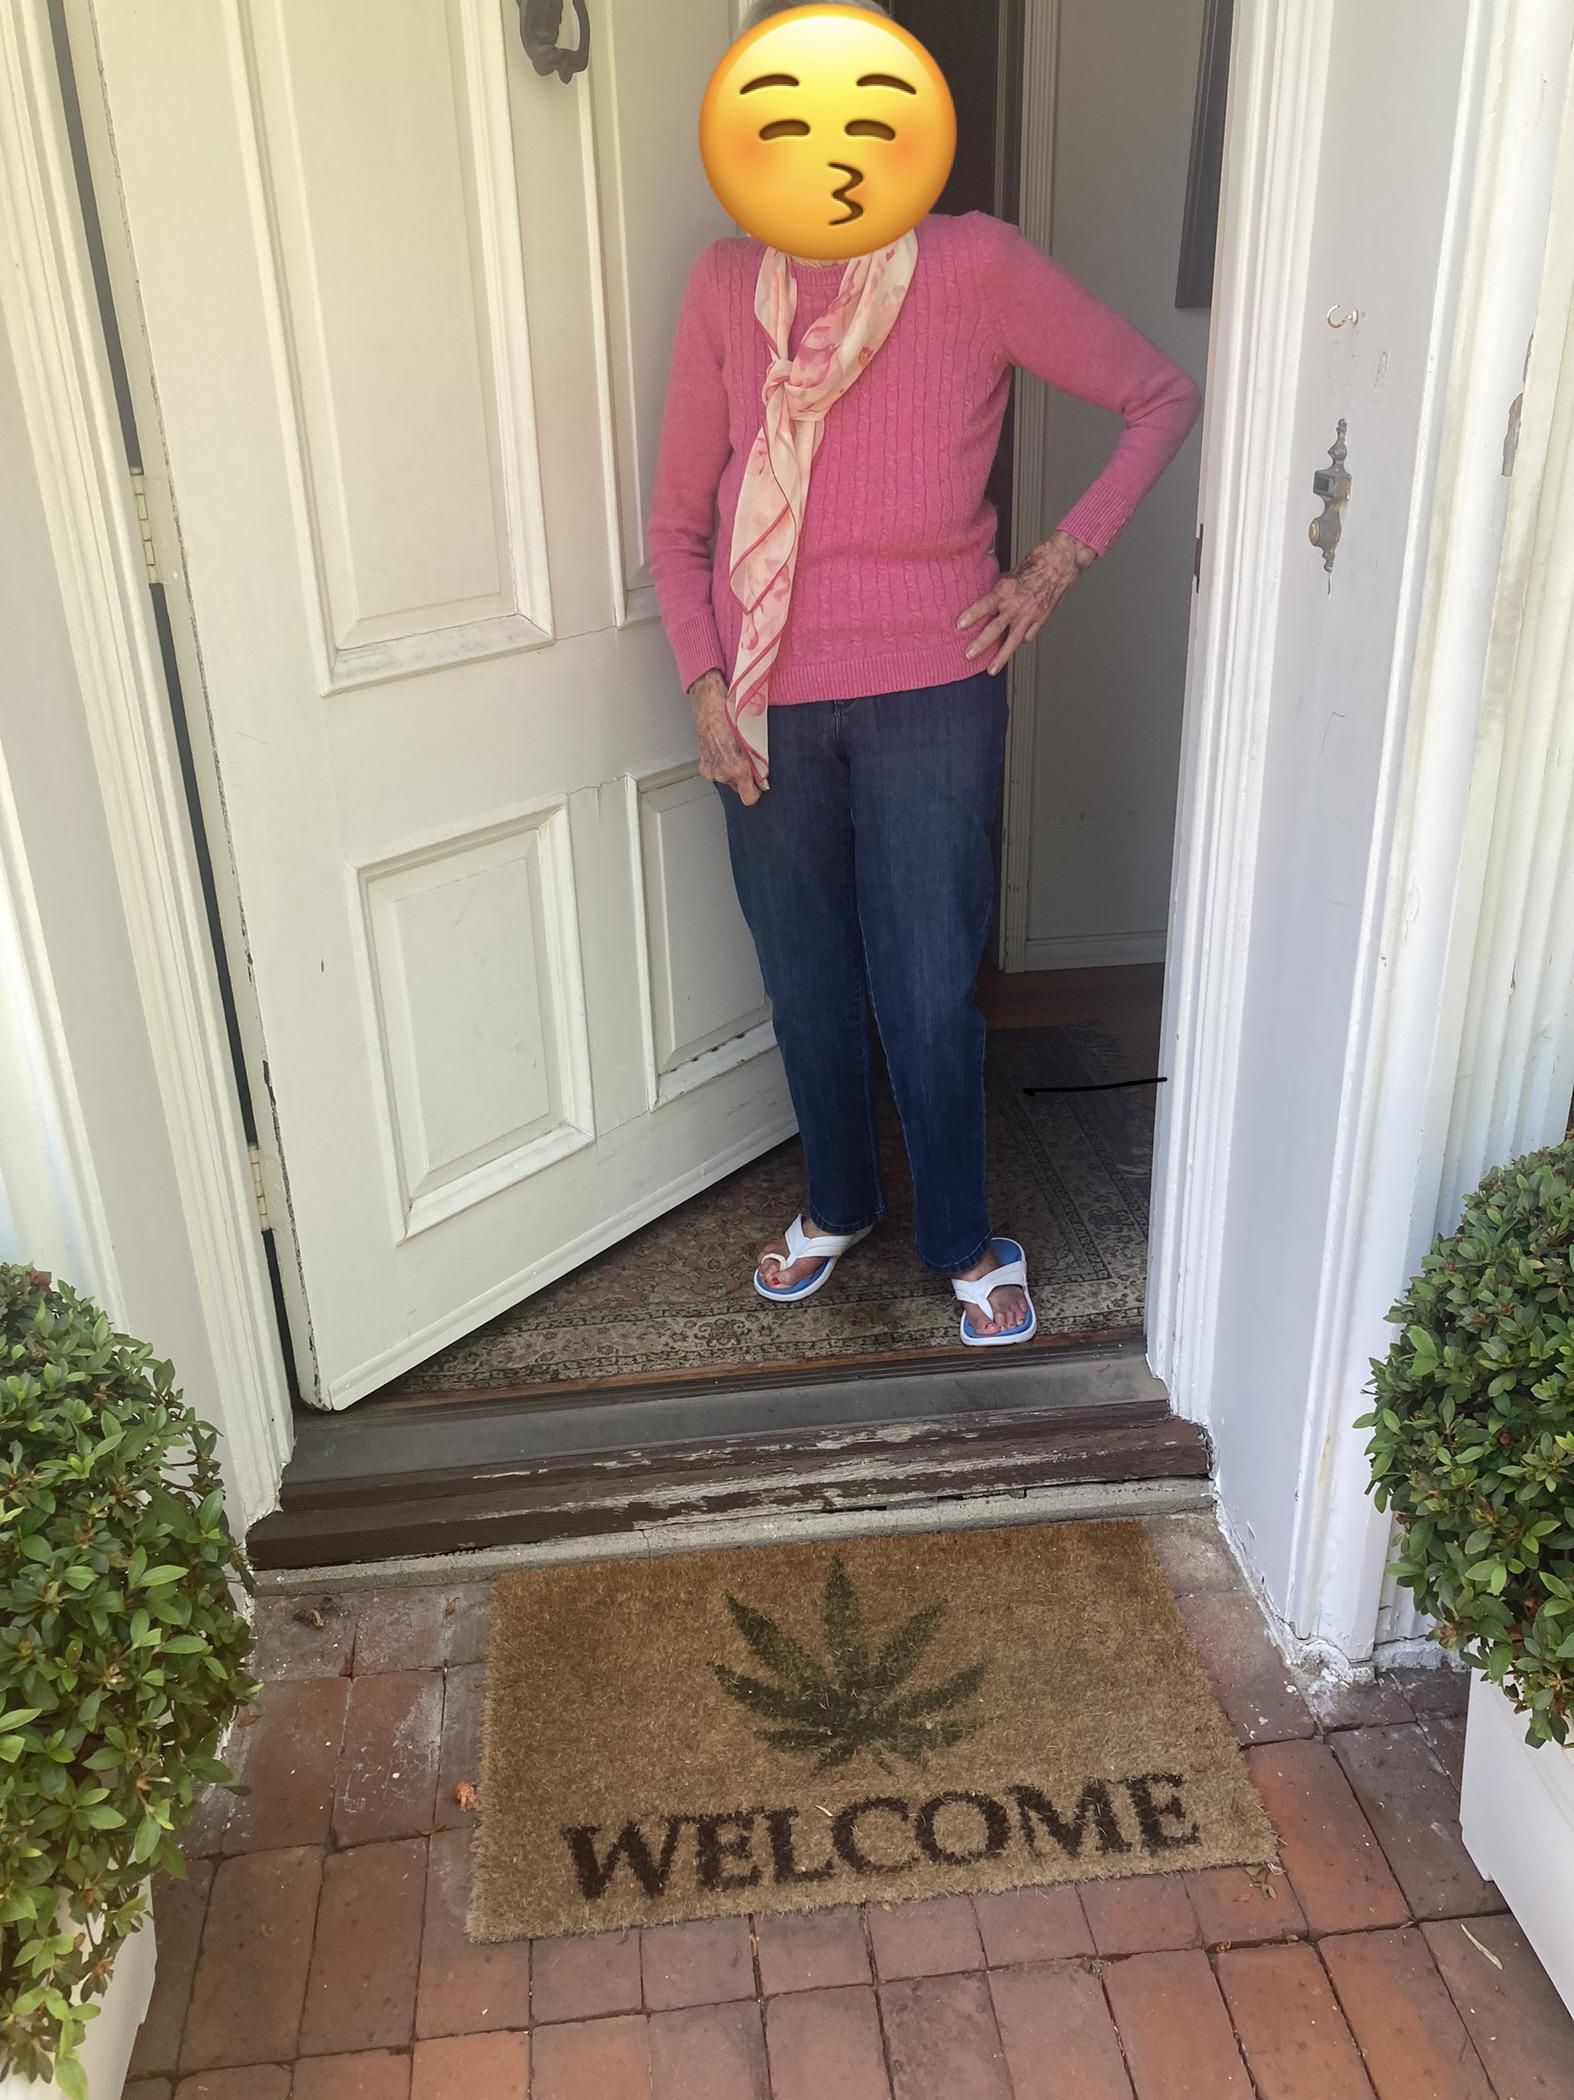 My 100 year old, very conservative, almost blind Gramma with her new “gardeny” mat